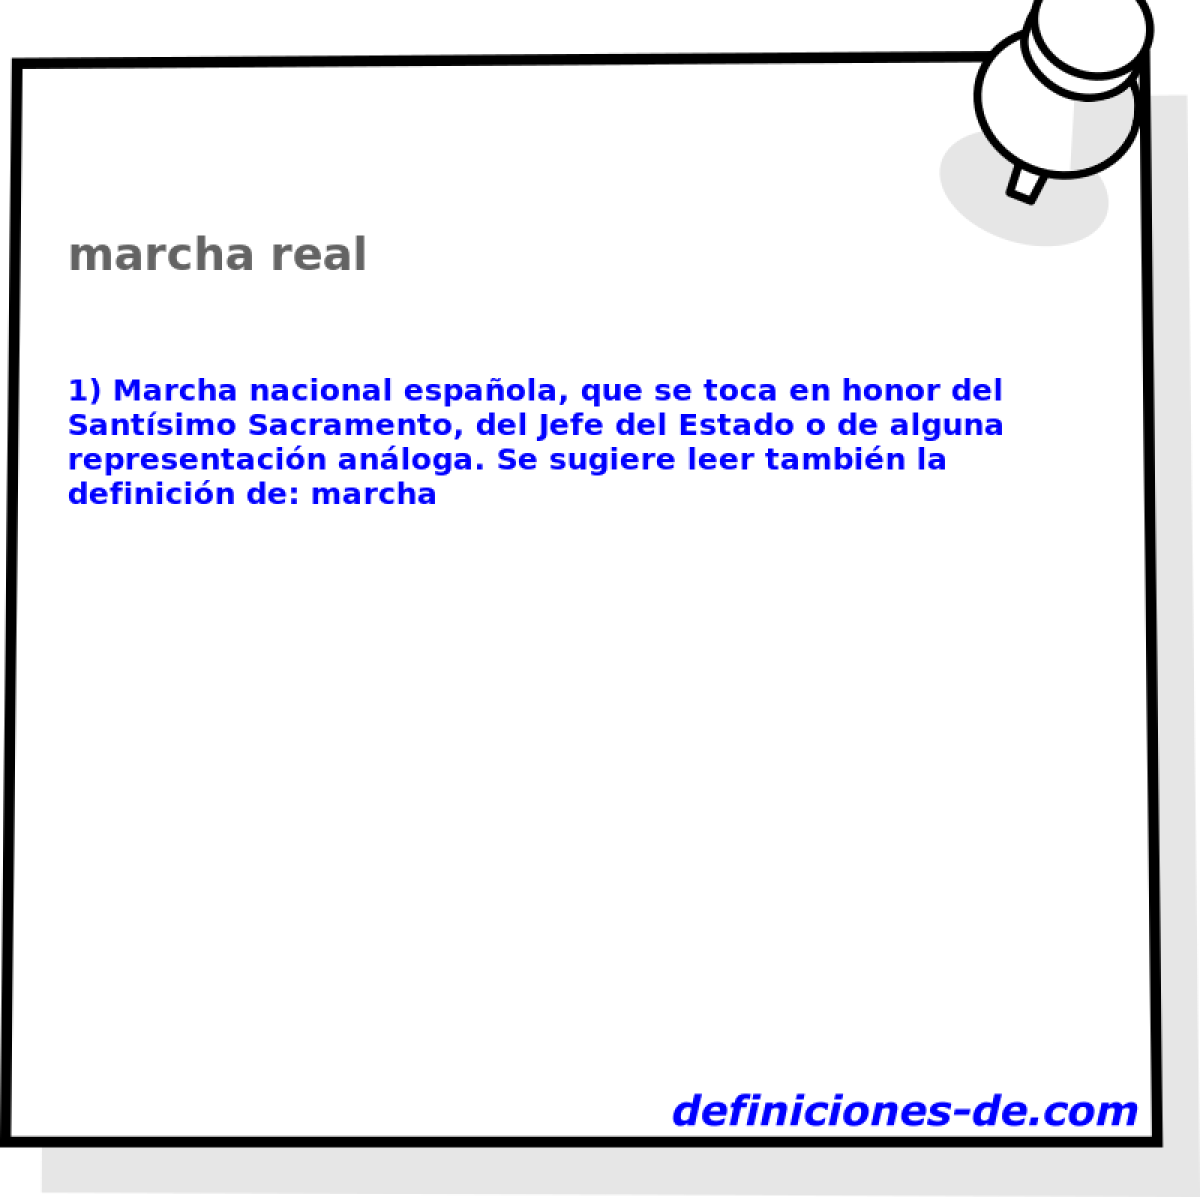 marcha real 